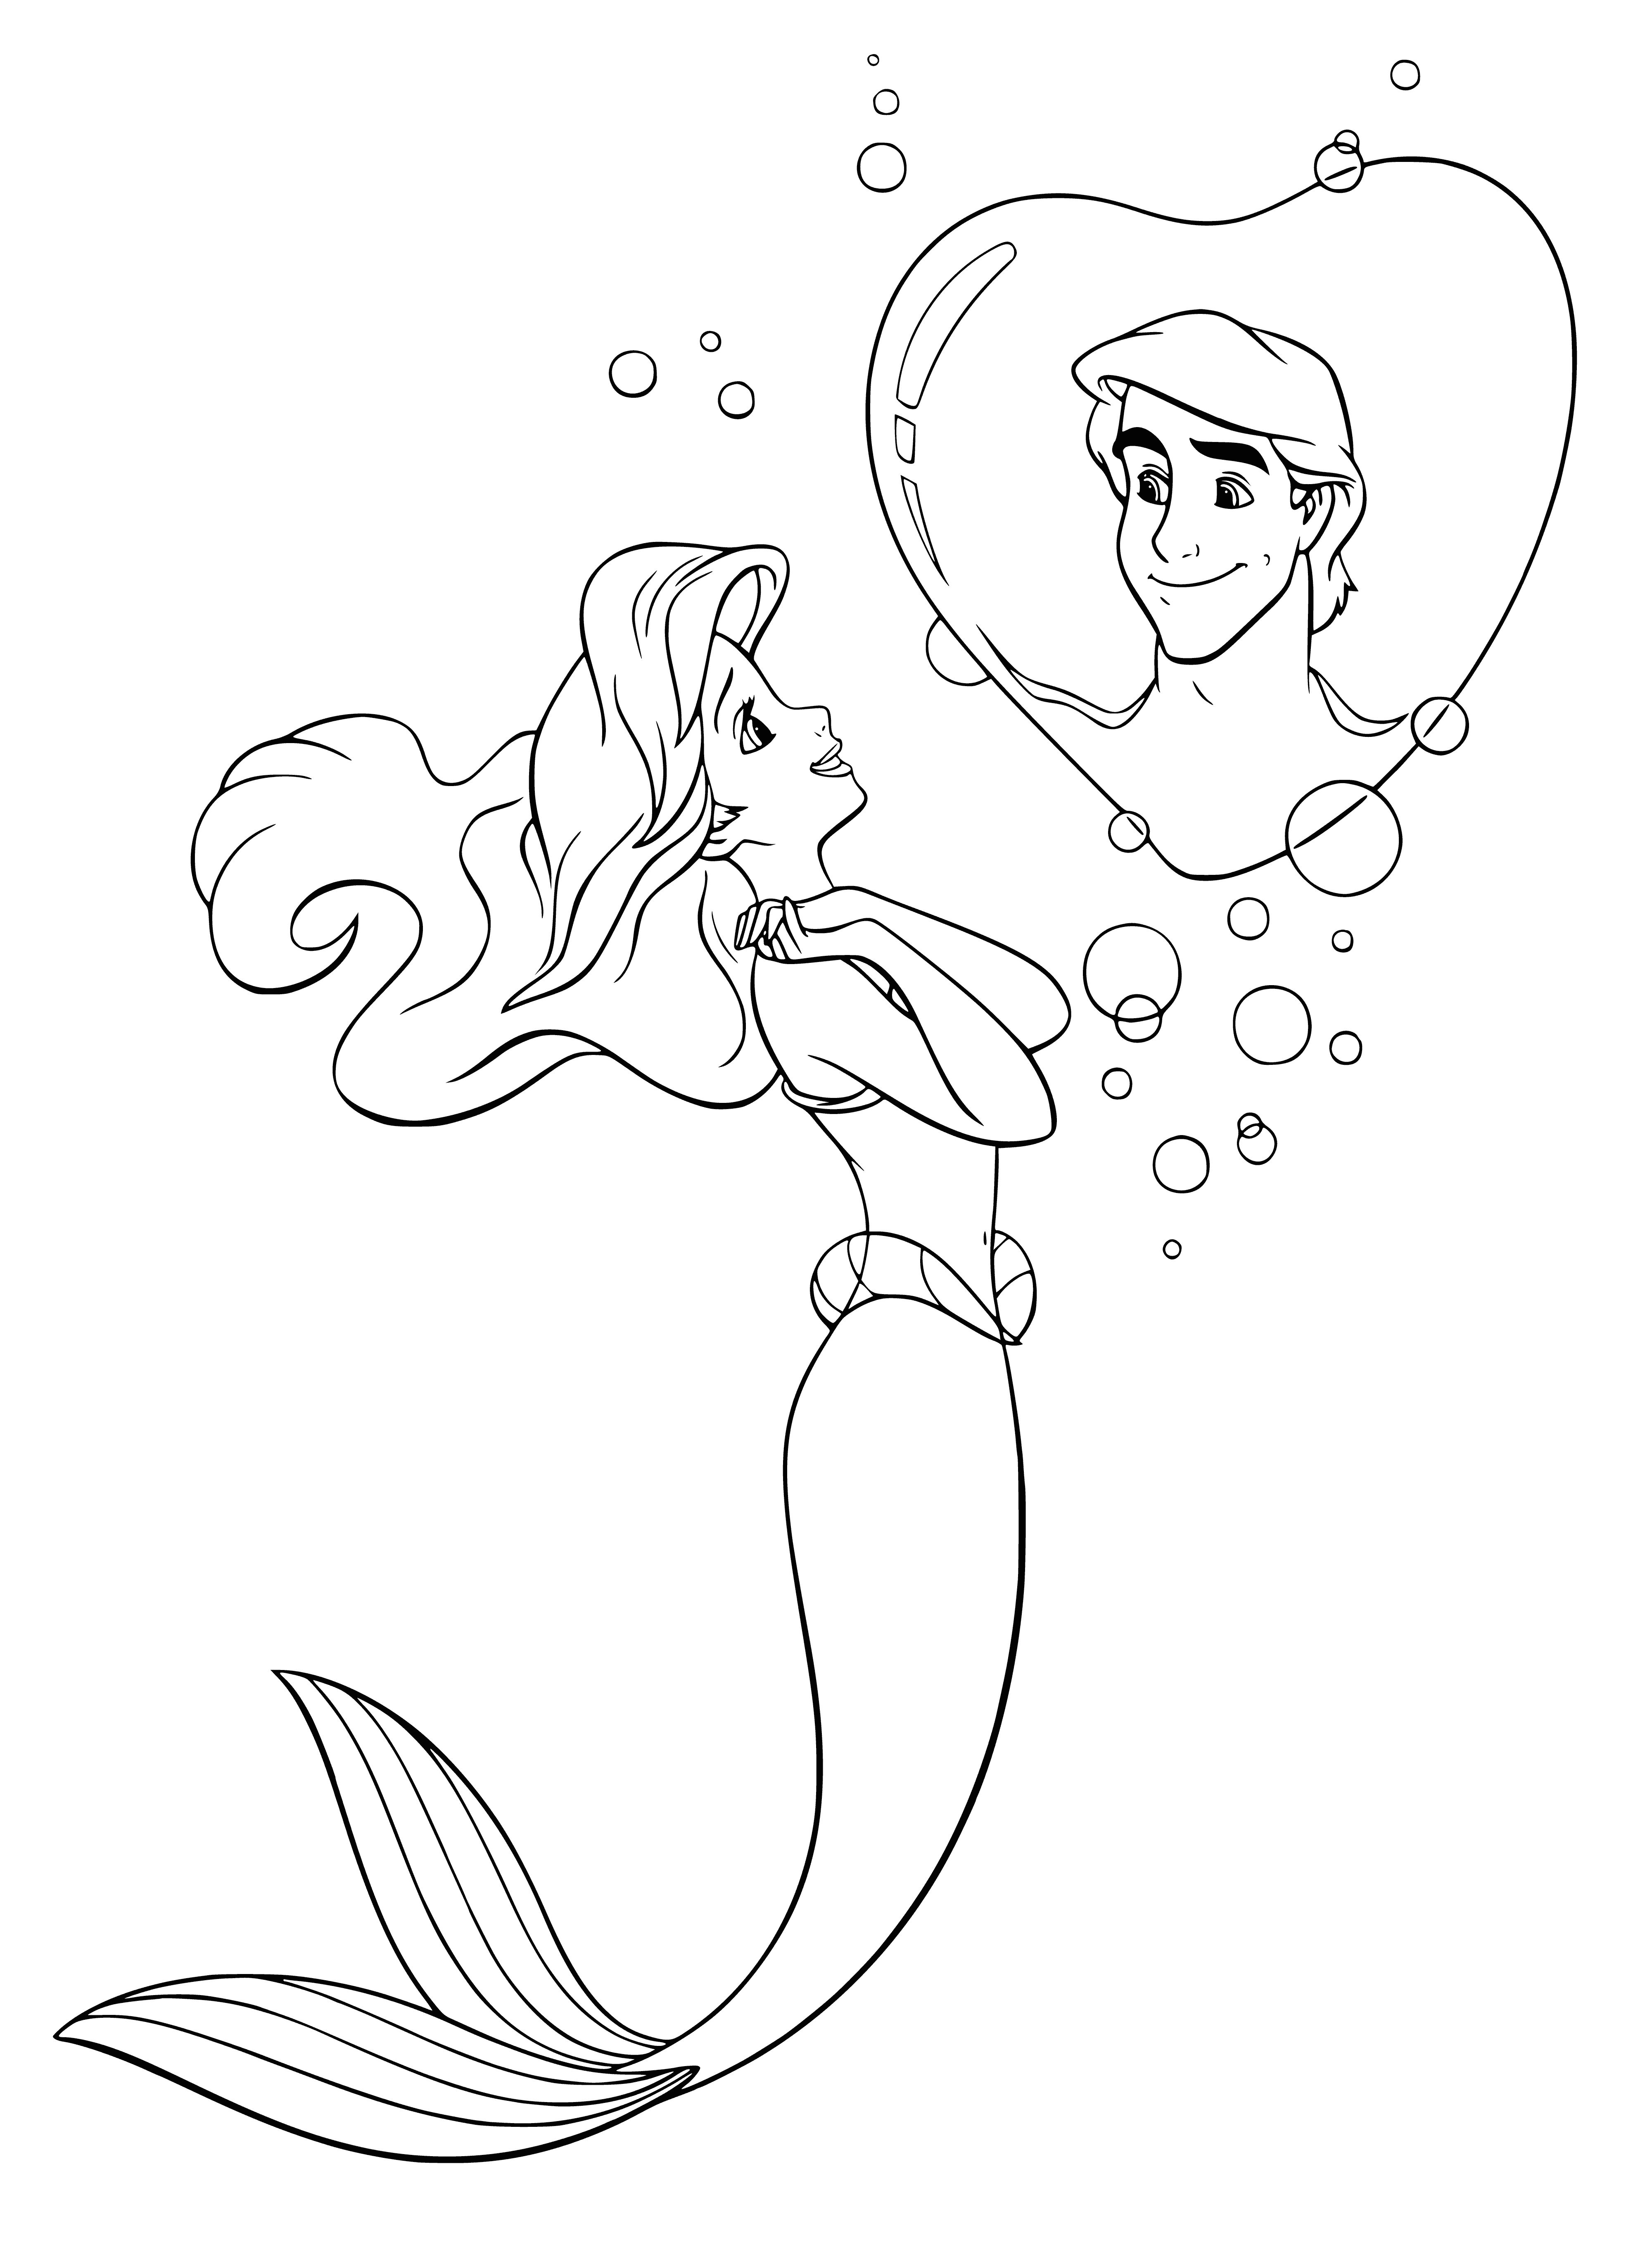 coloring page: Ariel loves the prince and excitedly awaits making him hers.